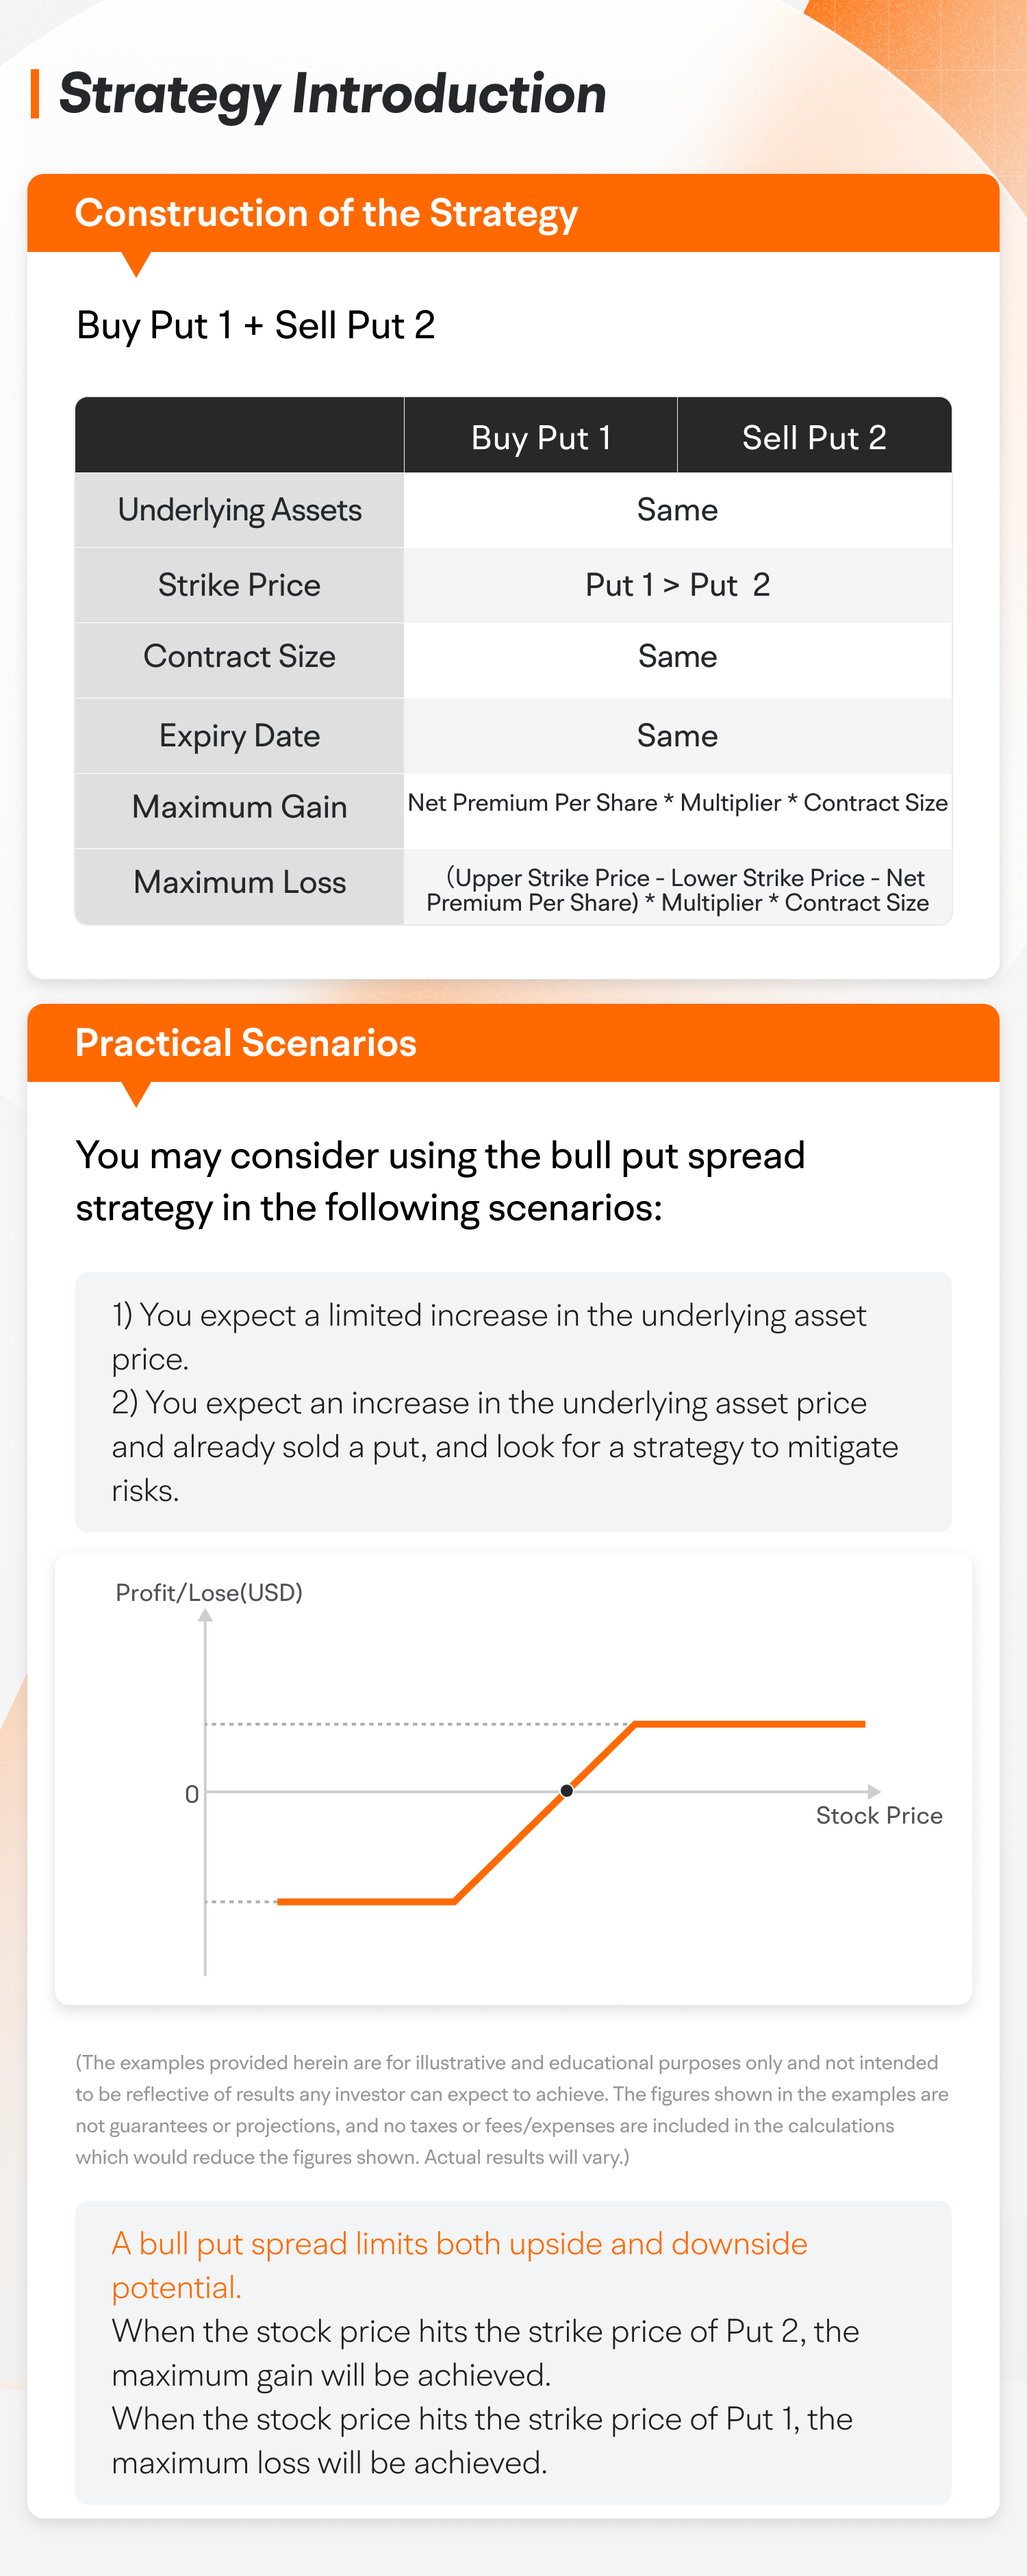 How Can Bull Put Spread Reduce Your Cost When Constructing Strategy: A Case Study of Microsoft -1